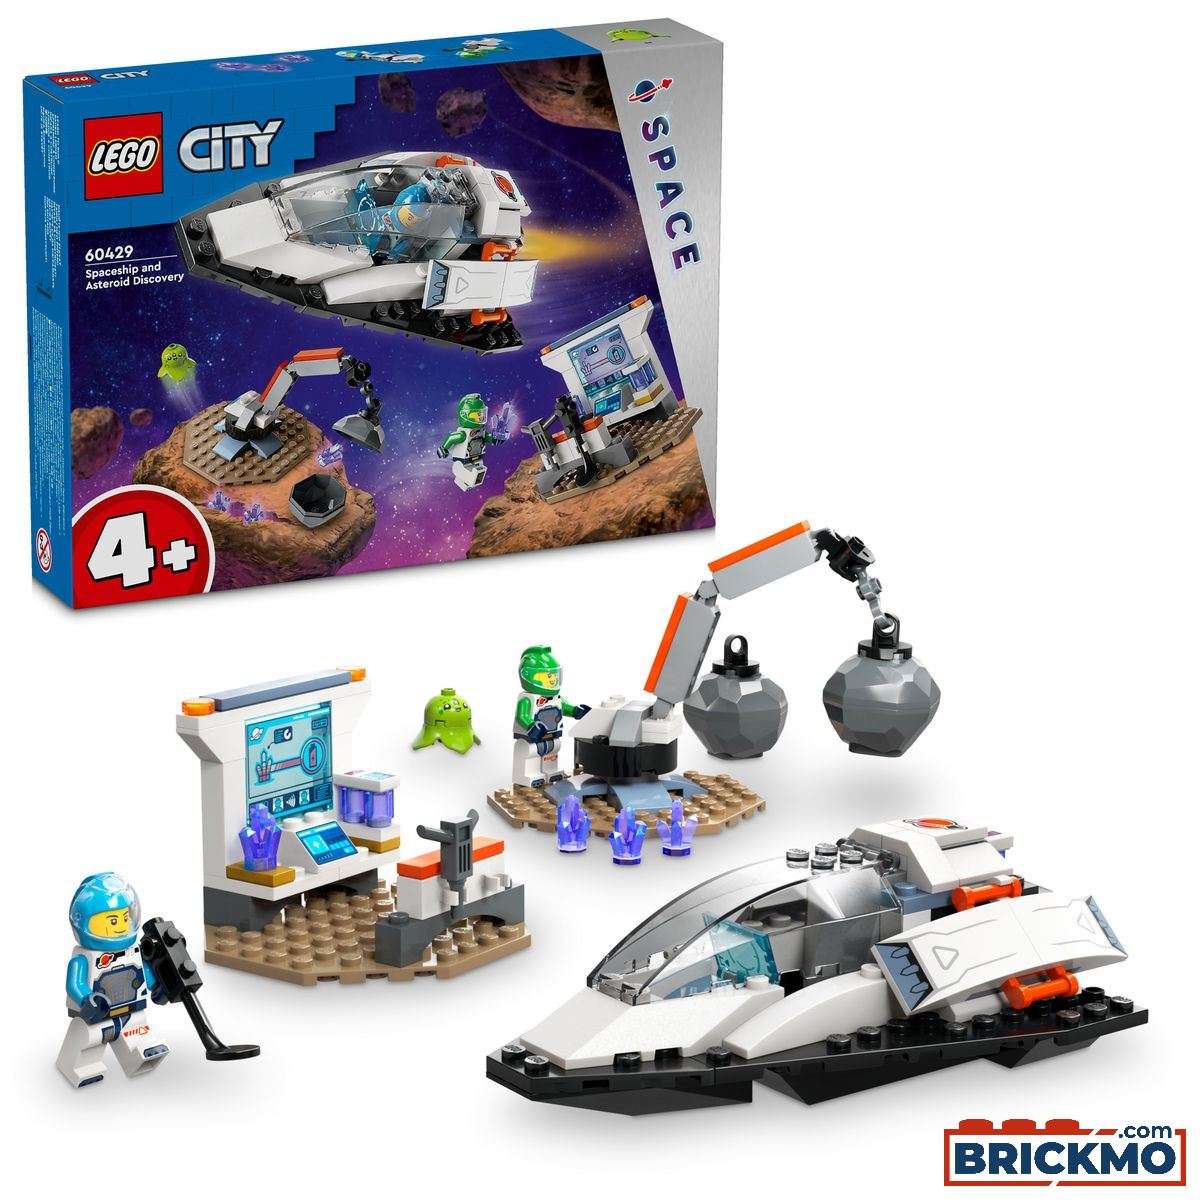 LEGO City 60429 Spaceship and Asteroid Discovery 60429